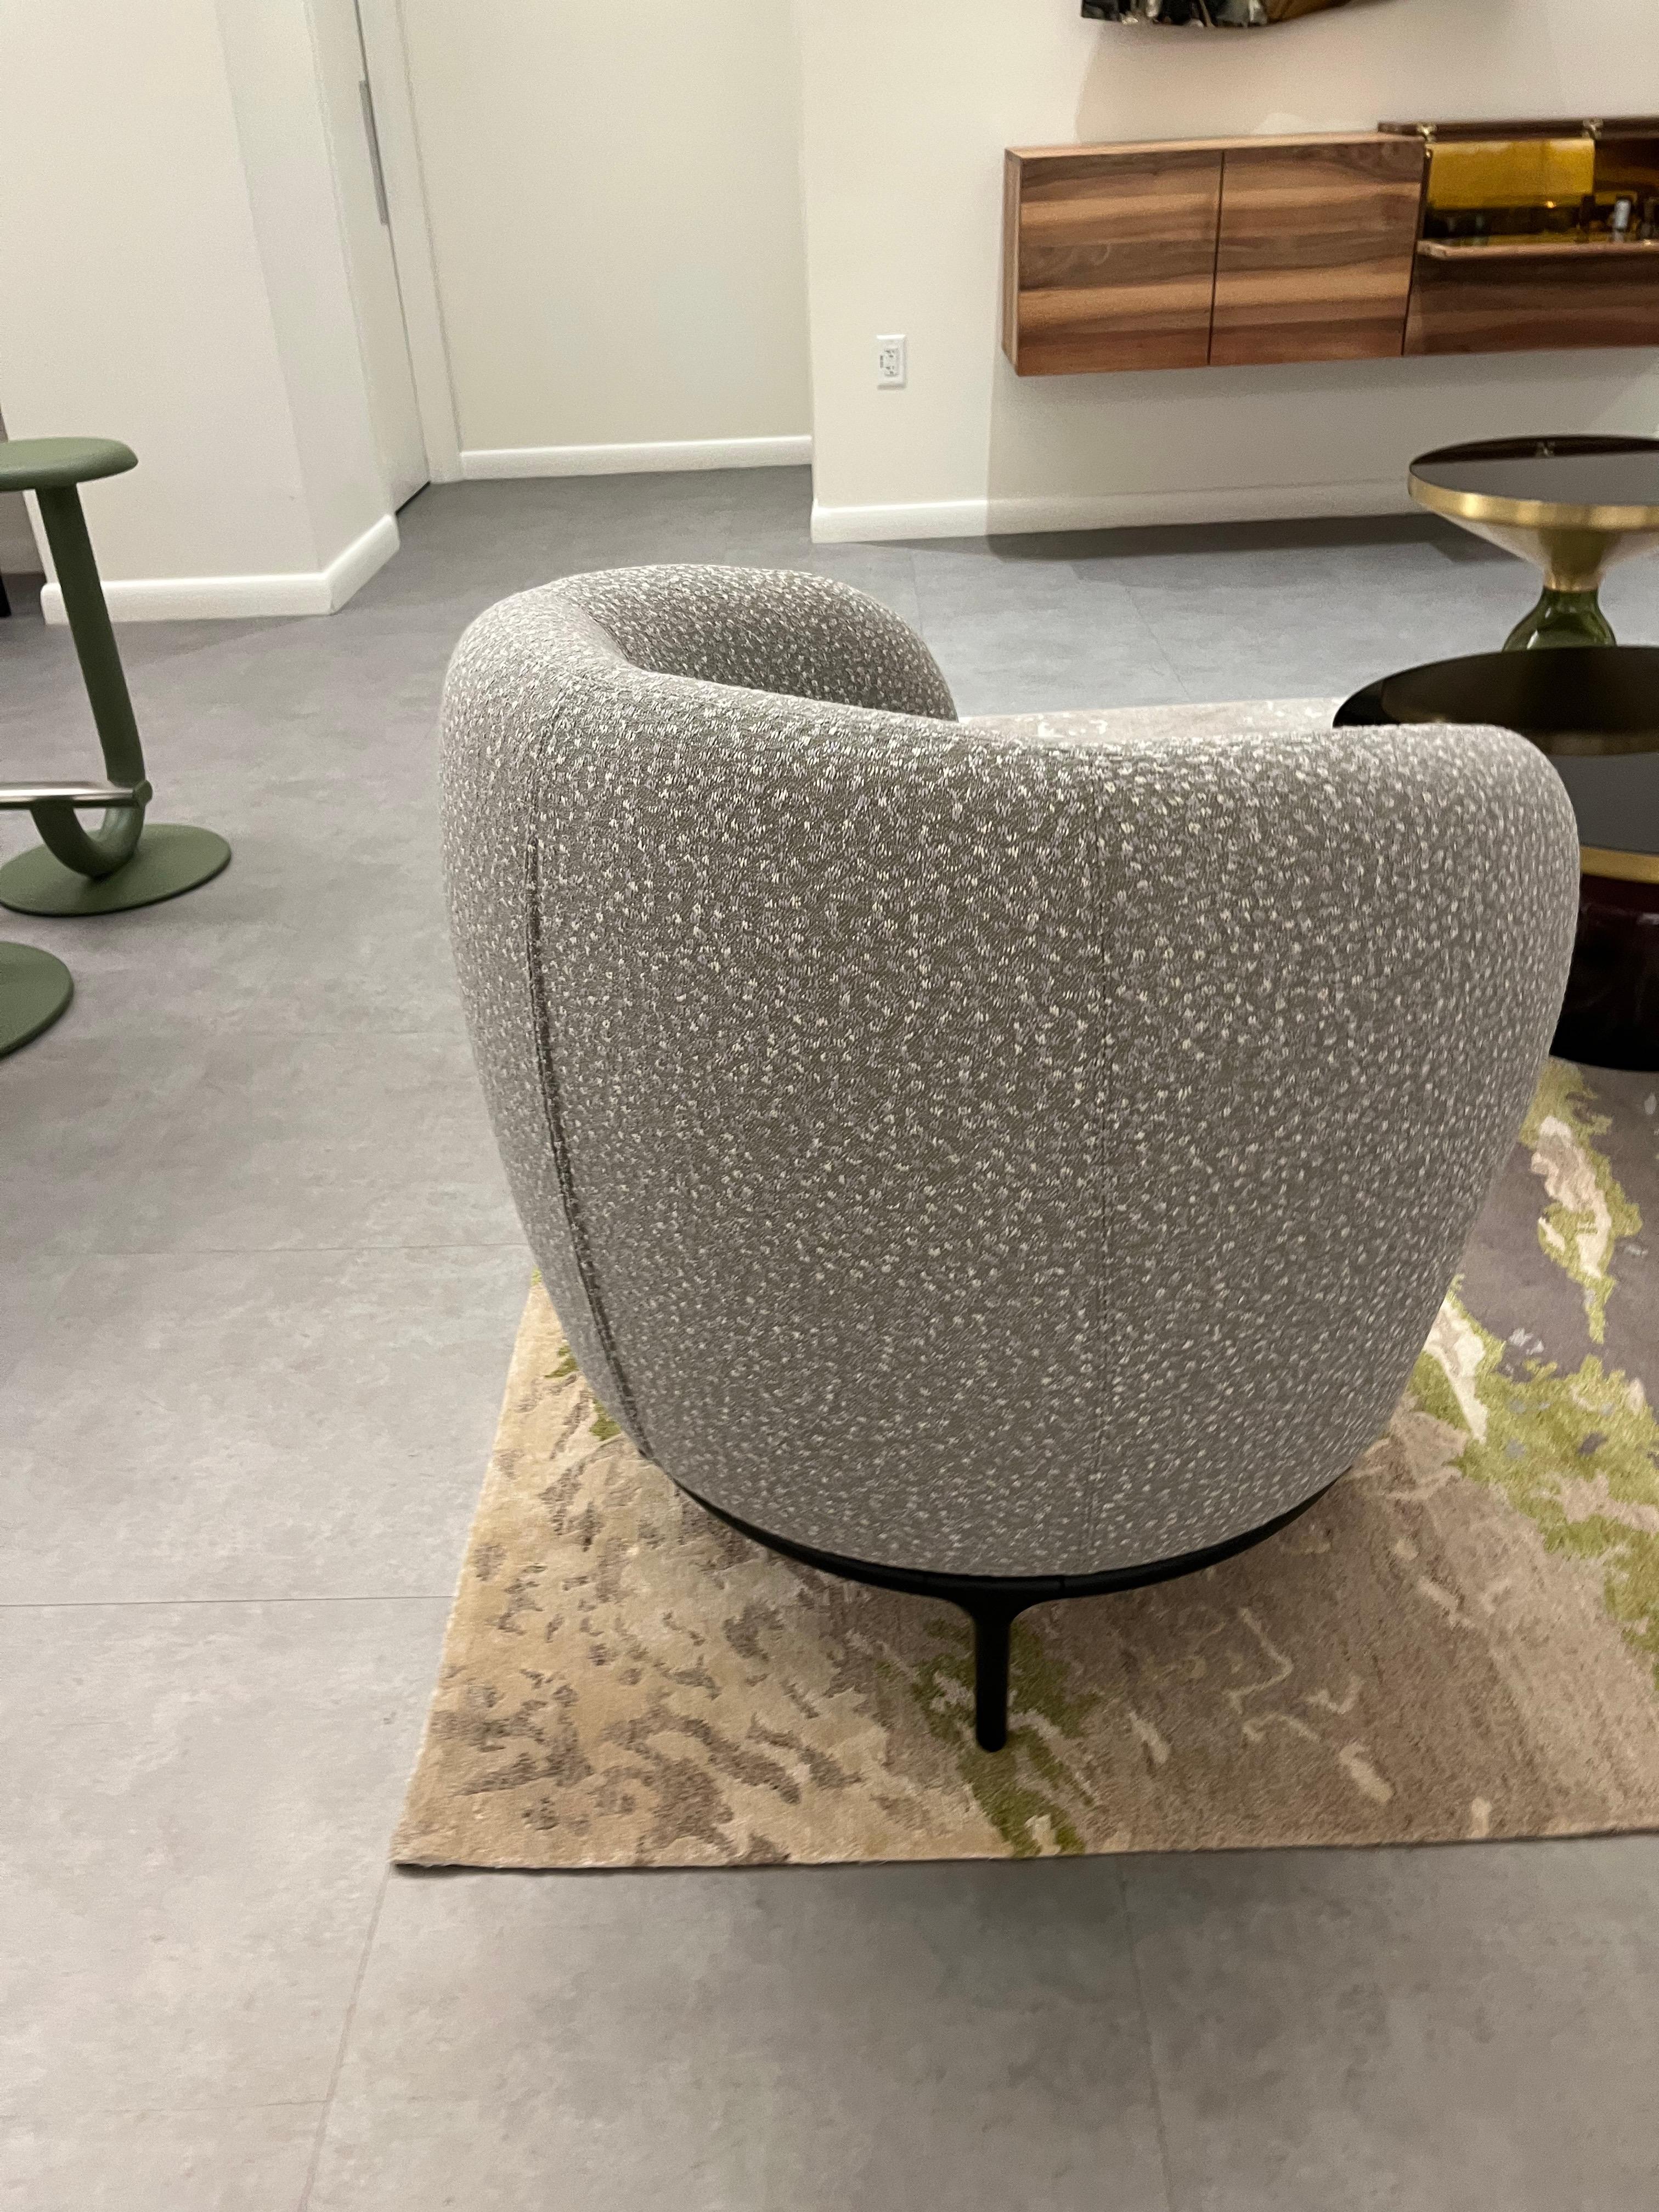 Wittmann Vuelta 72 Swivel armchair

72cm x 67cm x 77cmH
with swivel
Upholstered in Kvadrat RIA color 241 (cat J) Base in Black-Grey
Eclectic, exciting, Mediterranean Baroque – and yet wonderfully timeless. These are the characteristics that